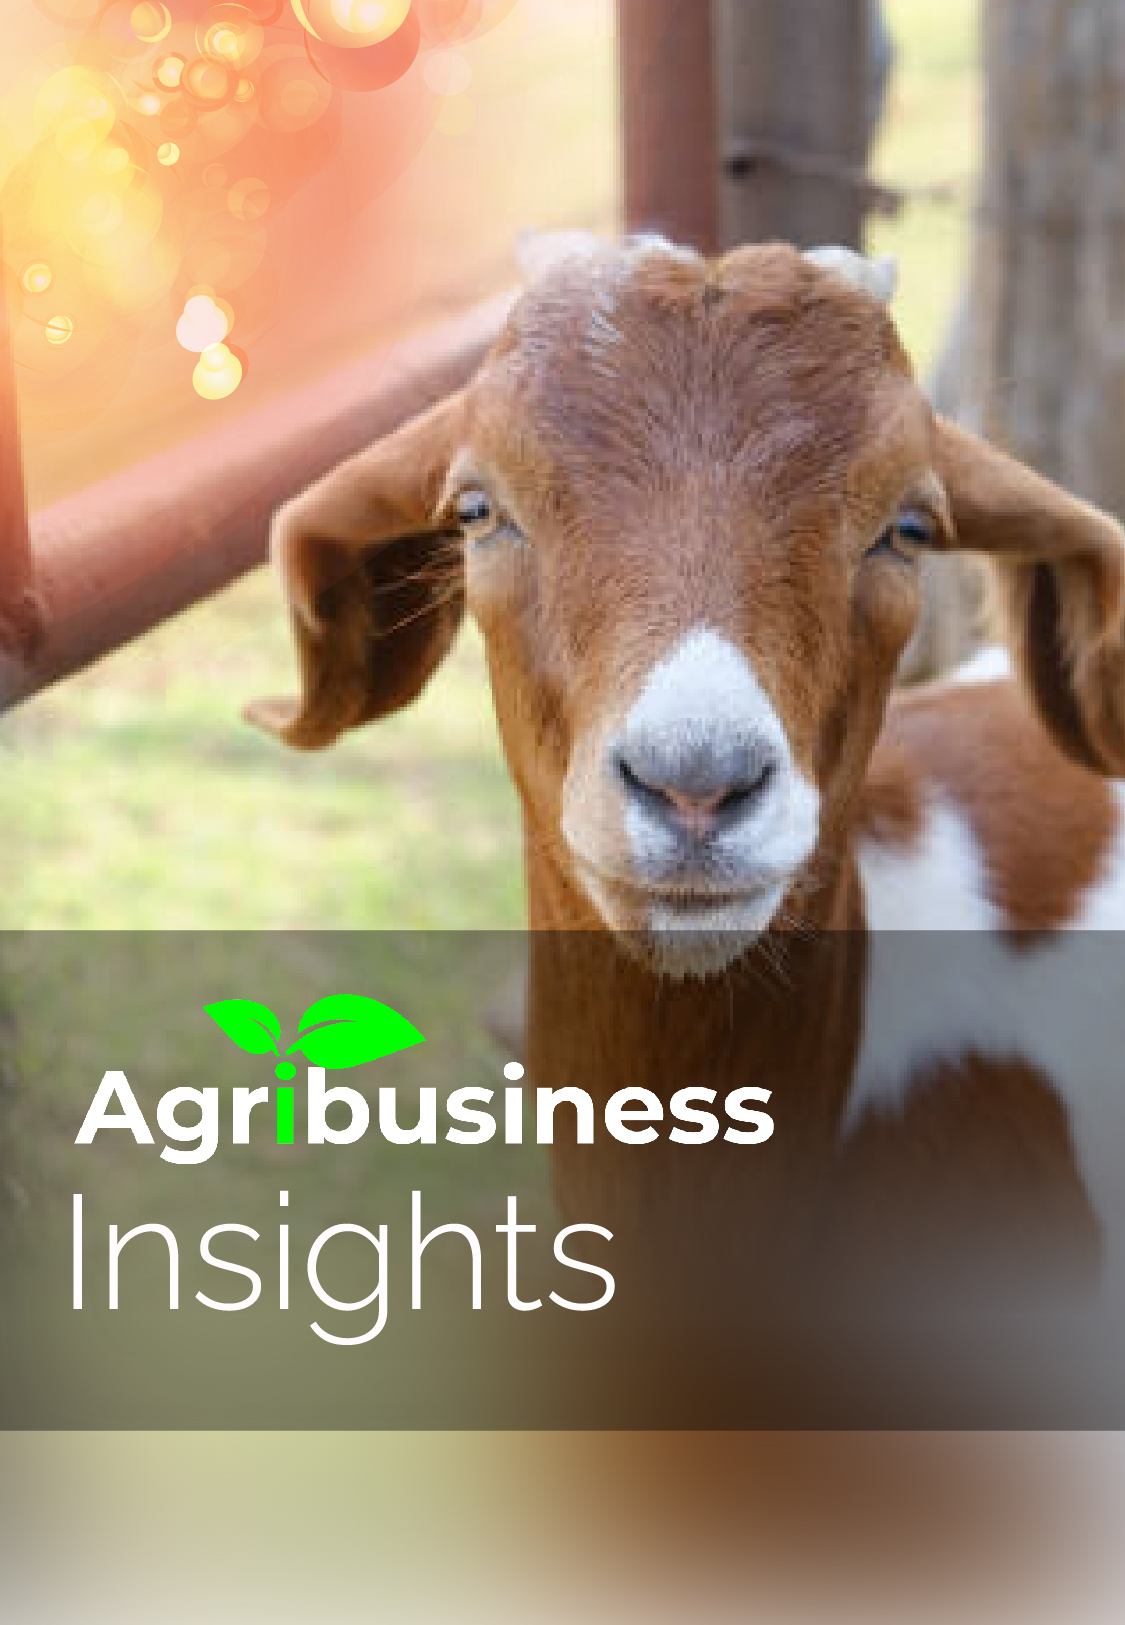 Agribusiness insights (Goat farming)